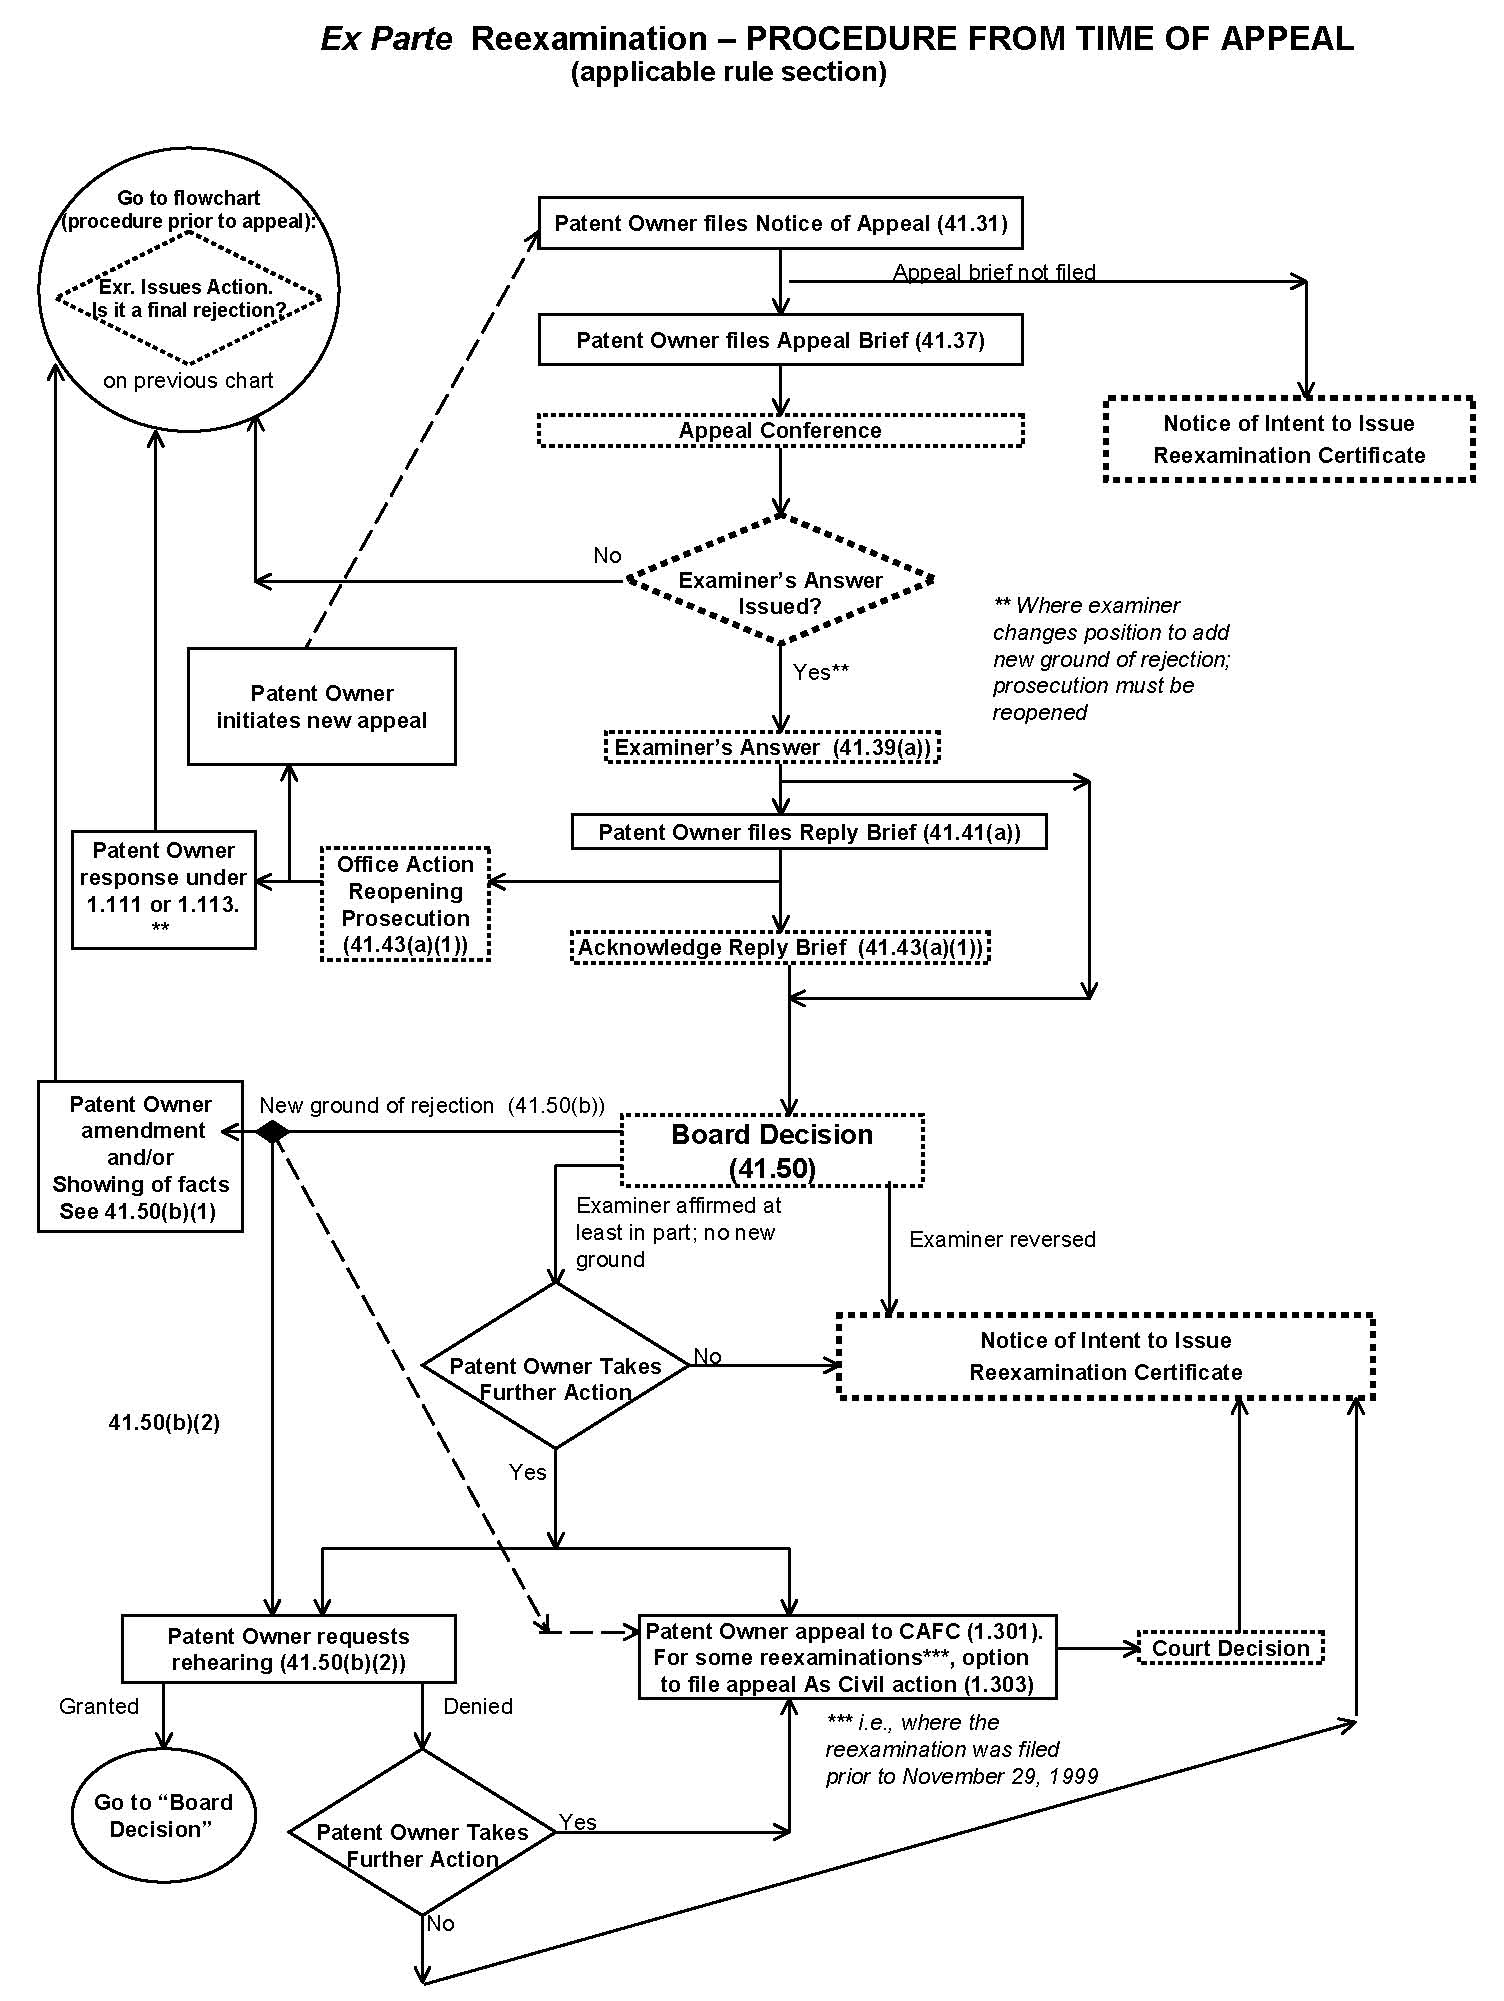 Flowchart - Ex Parte Reexamination - Procedure From of Appeal (applicable rule section) (Figure 2)